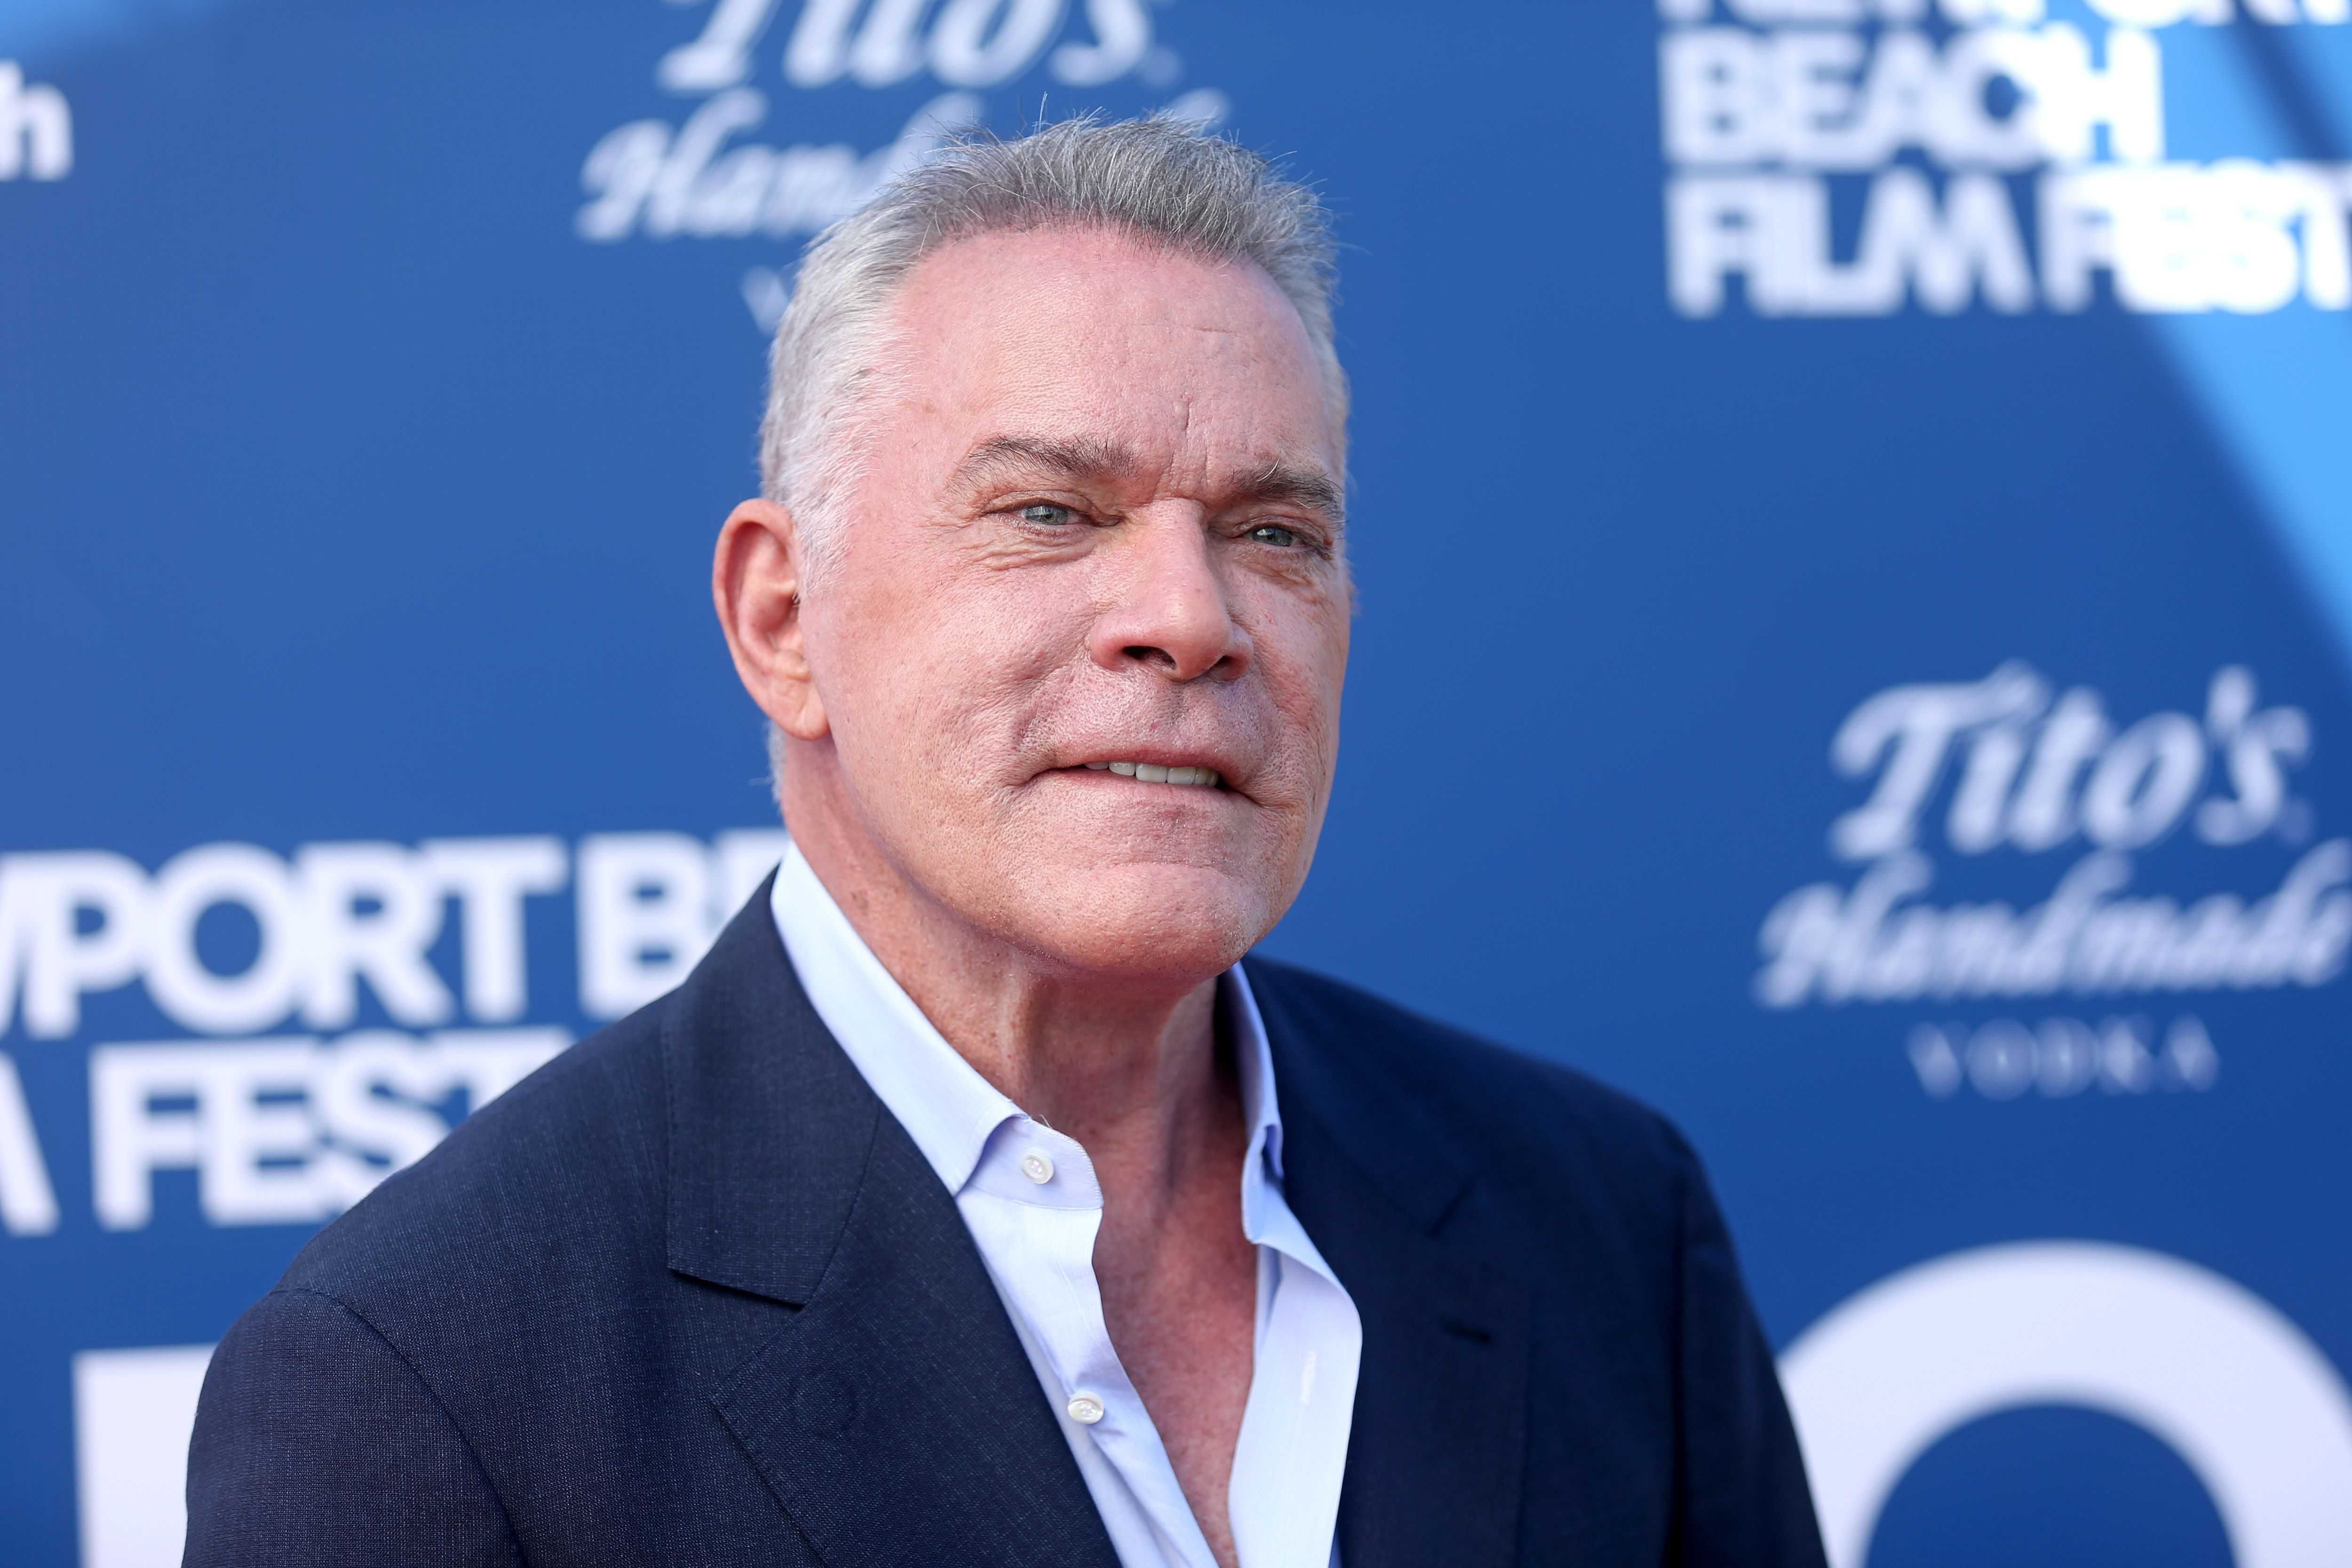 From 'Goodfellas' to 'Dangerous Waters' Reliving Ray Liotta's